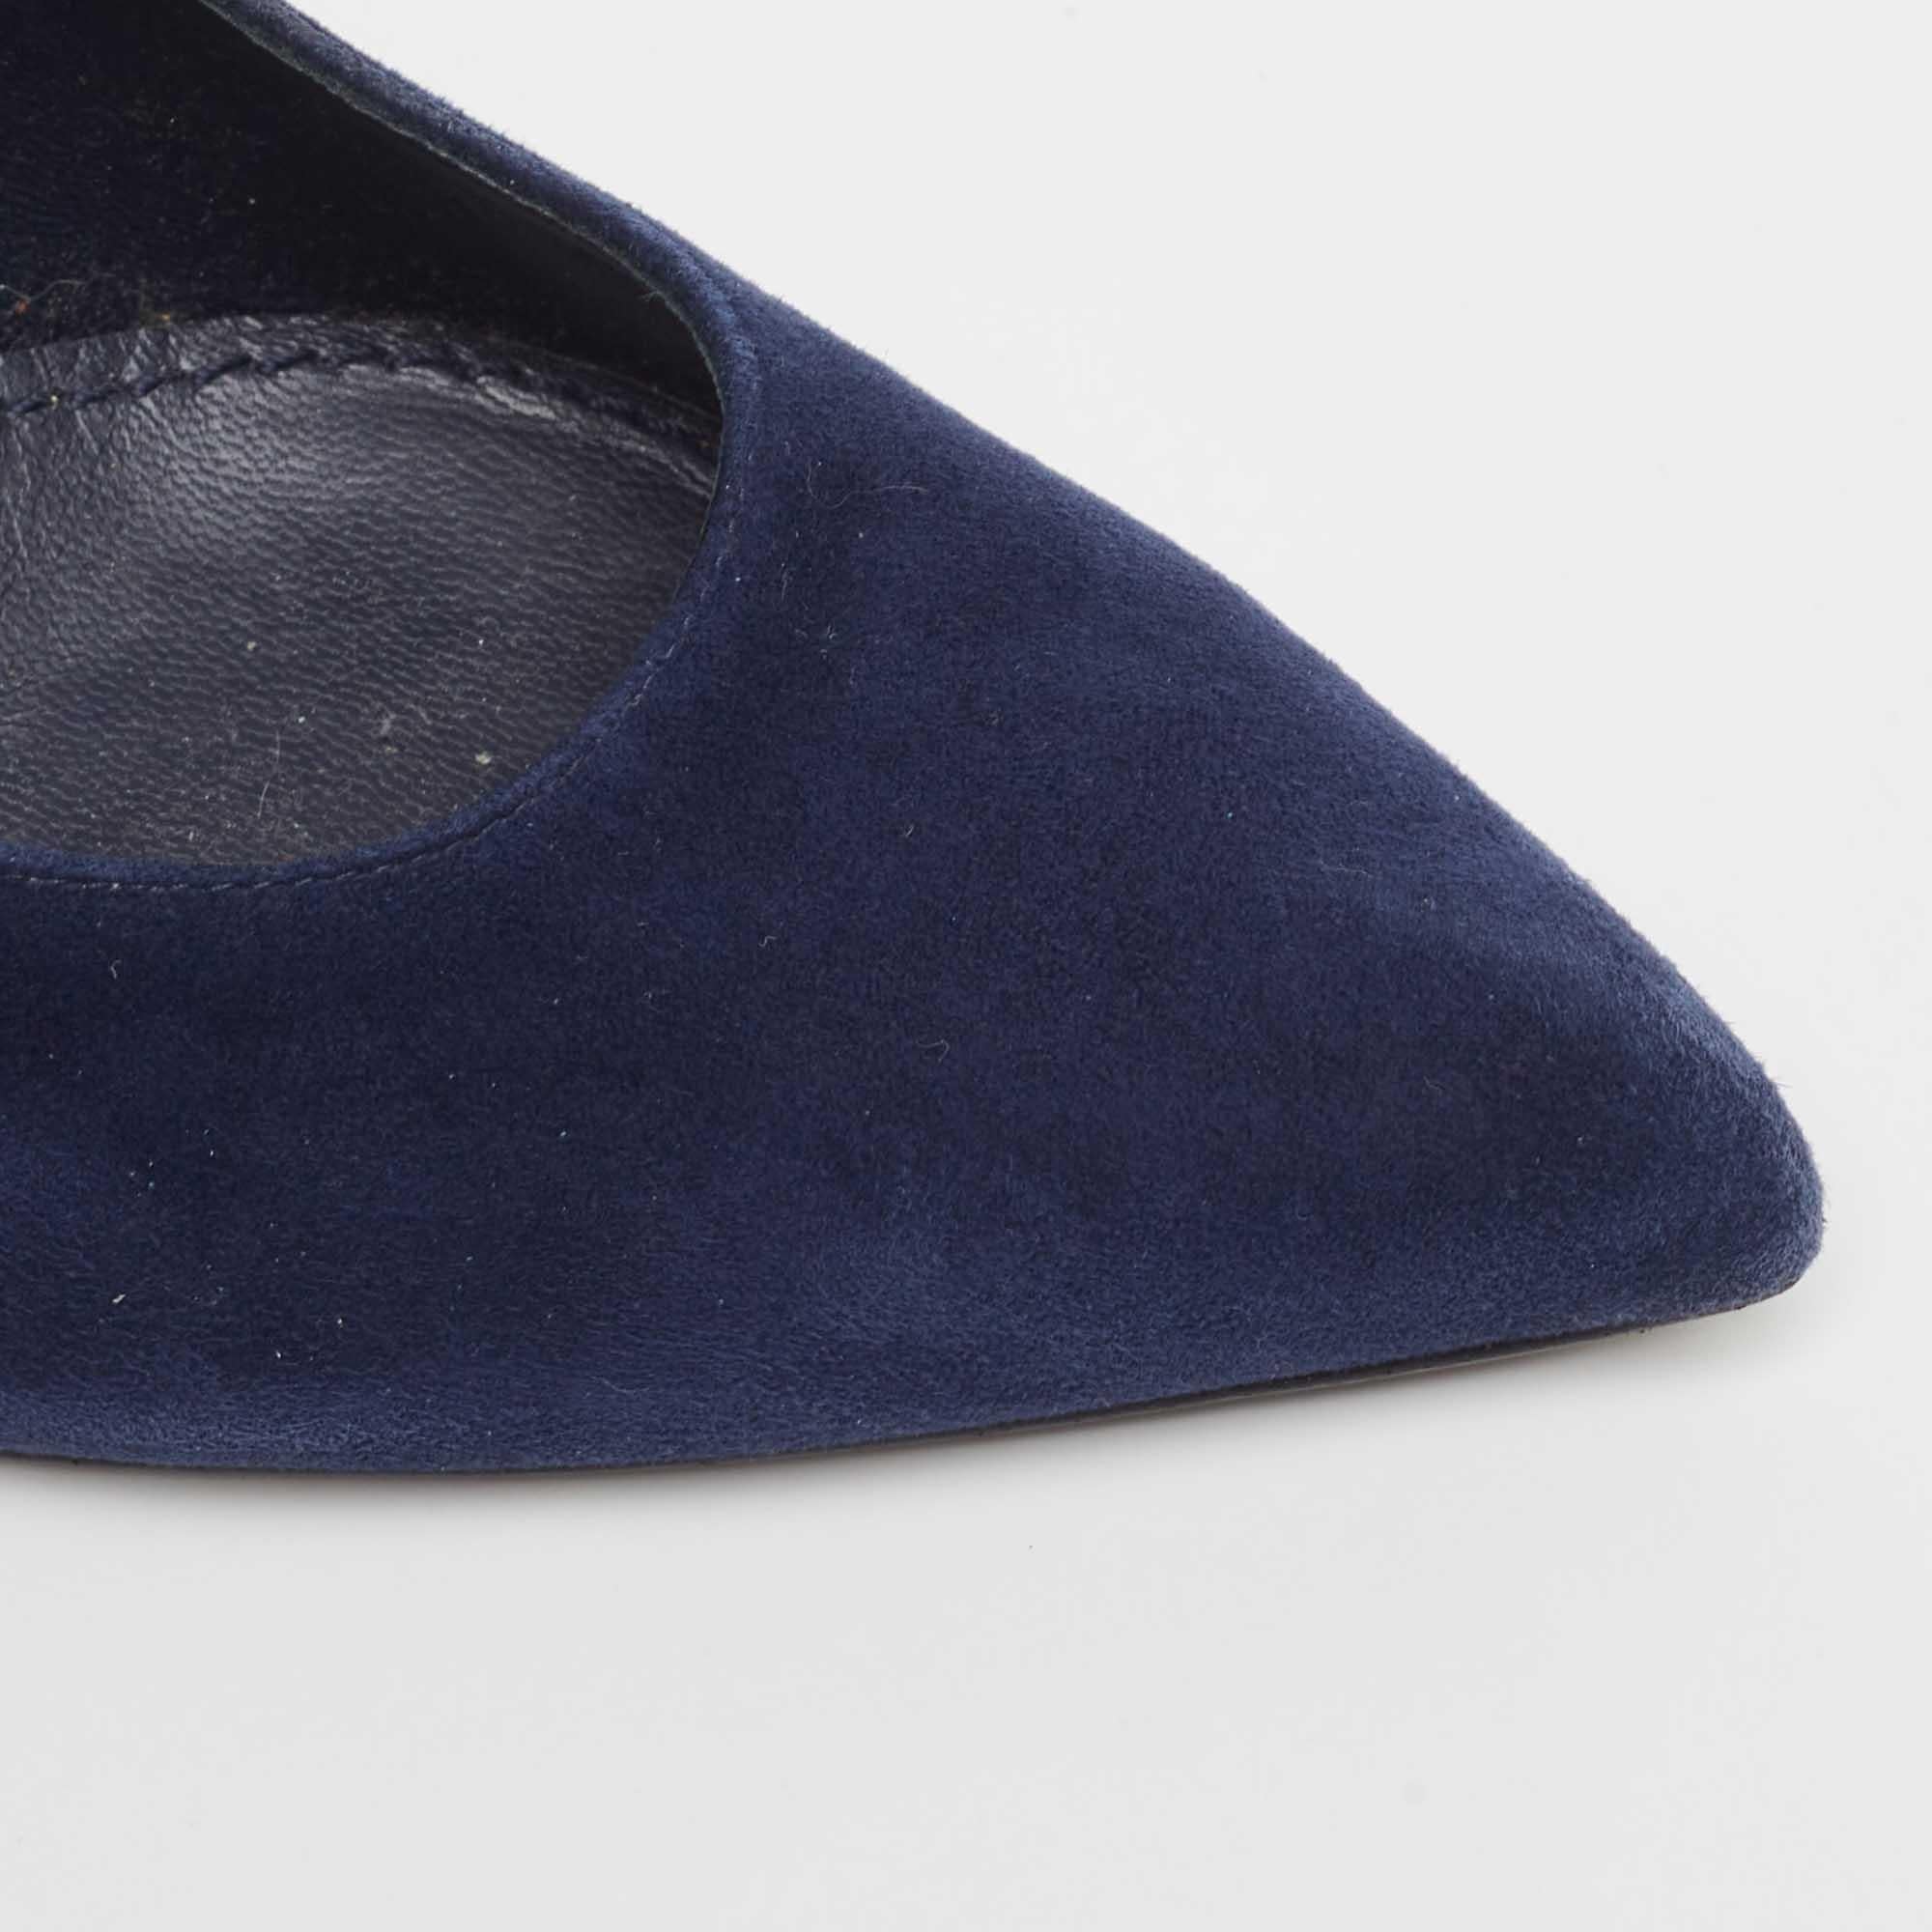 Louis Vuitton Navy Blue Suede Pointed Toe Pumps Size 37 For Sale 1